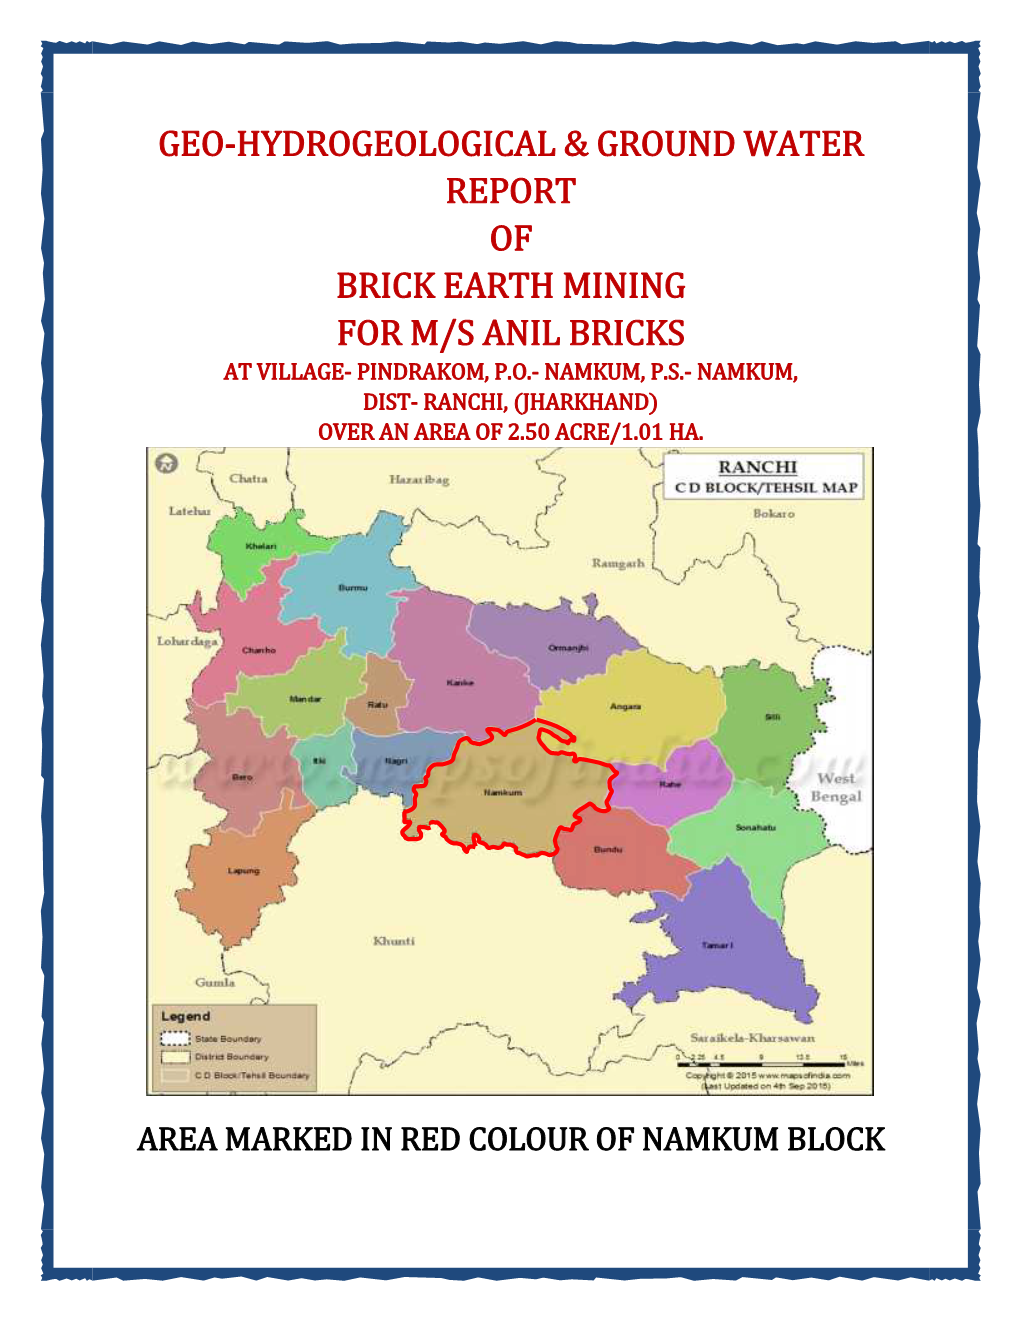 Geo-Hydrogeological & Ground Water Report of Brick Earth Mining for M/S